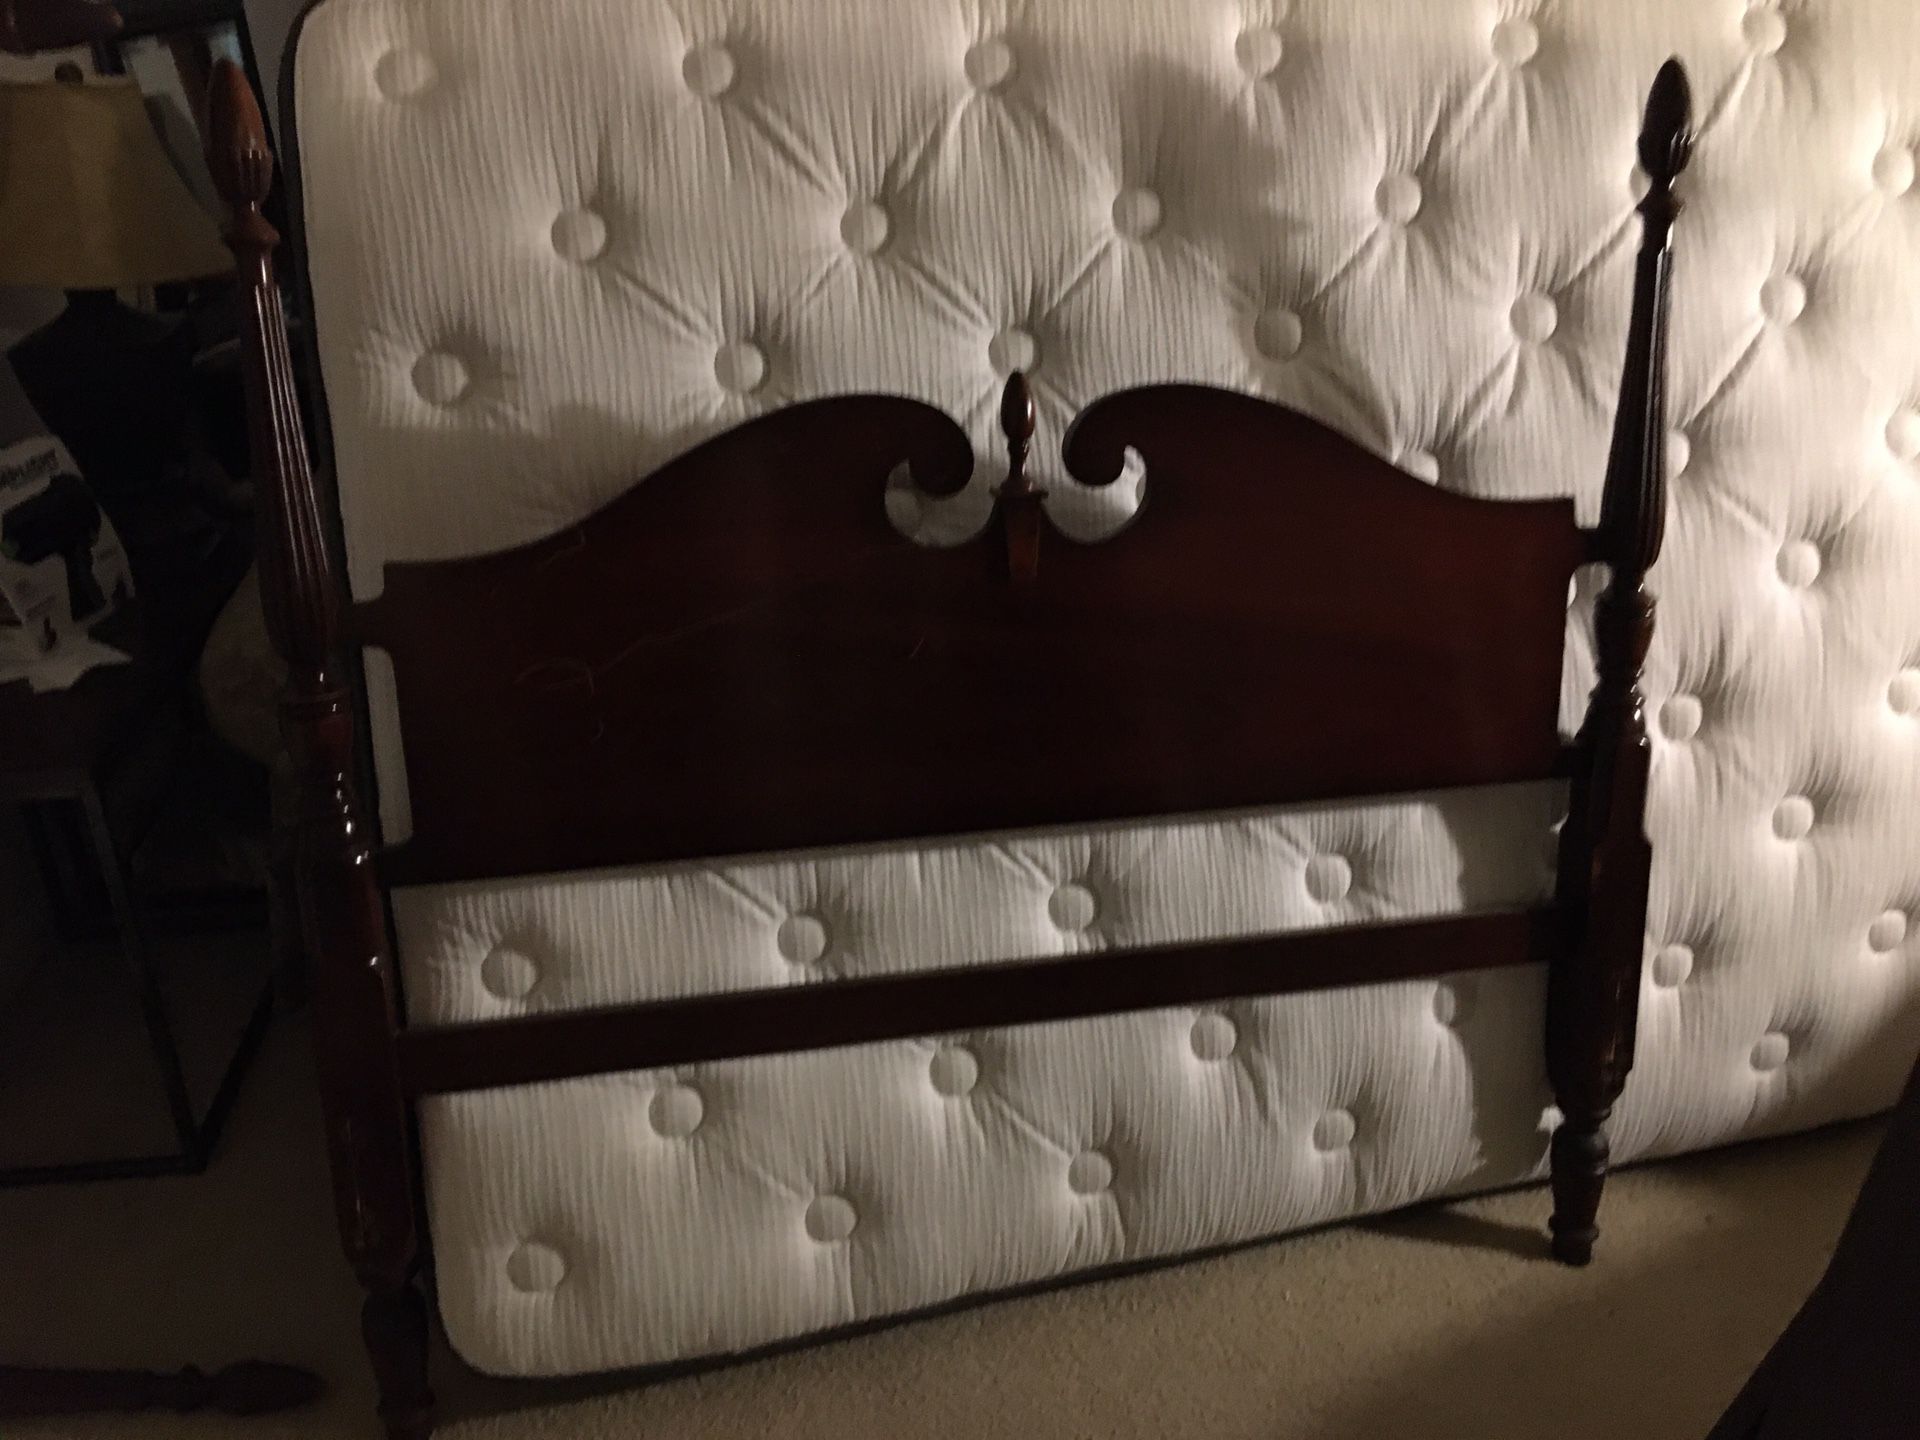 3 queen size beds for sell 125-175 a piece